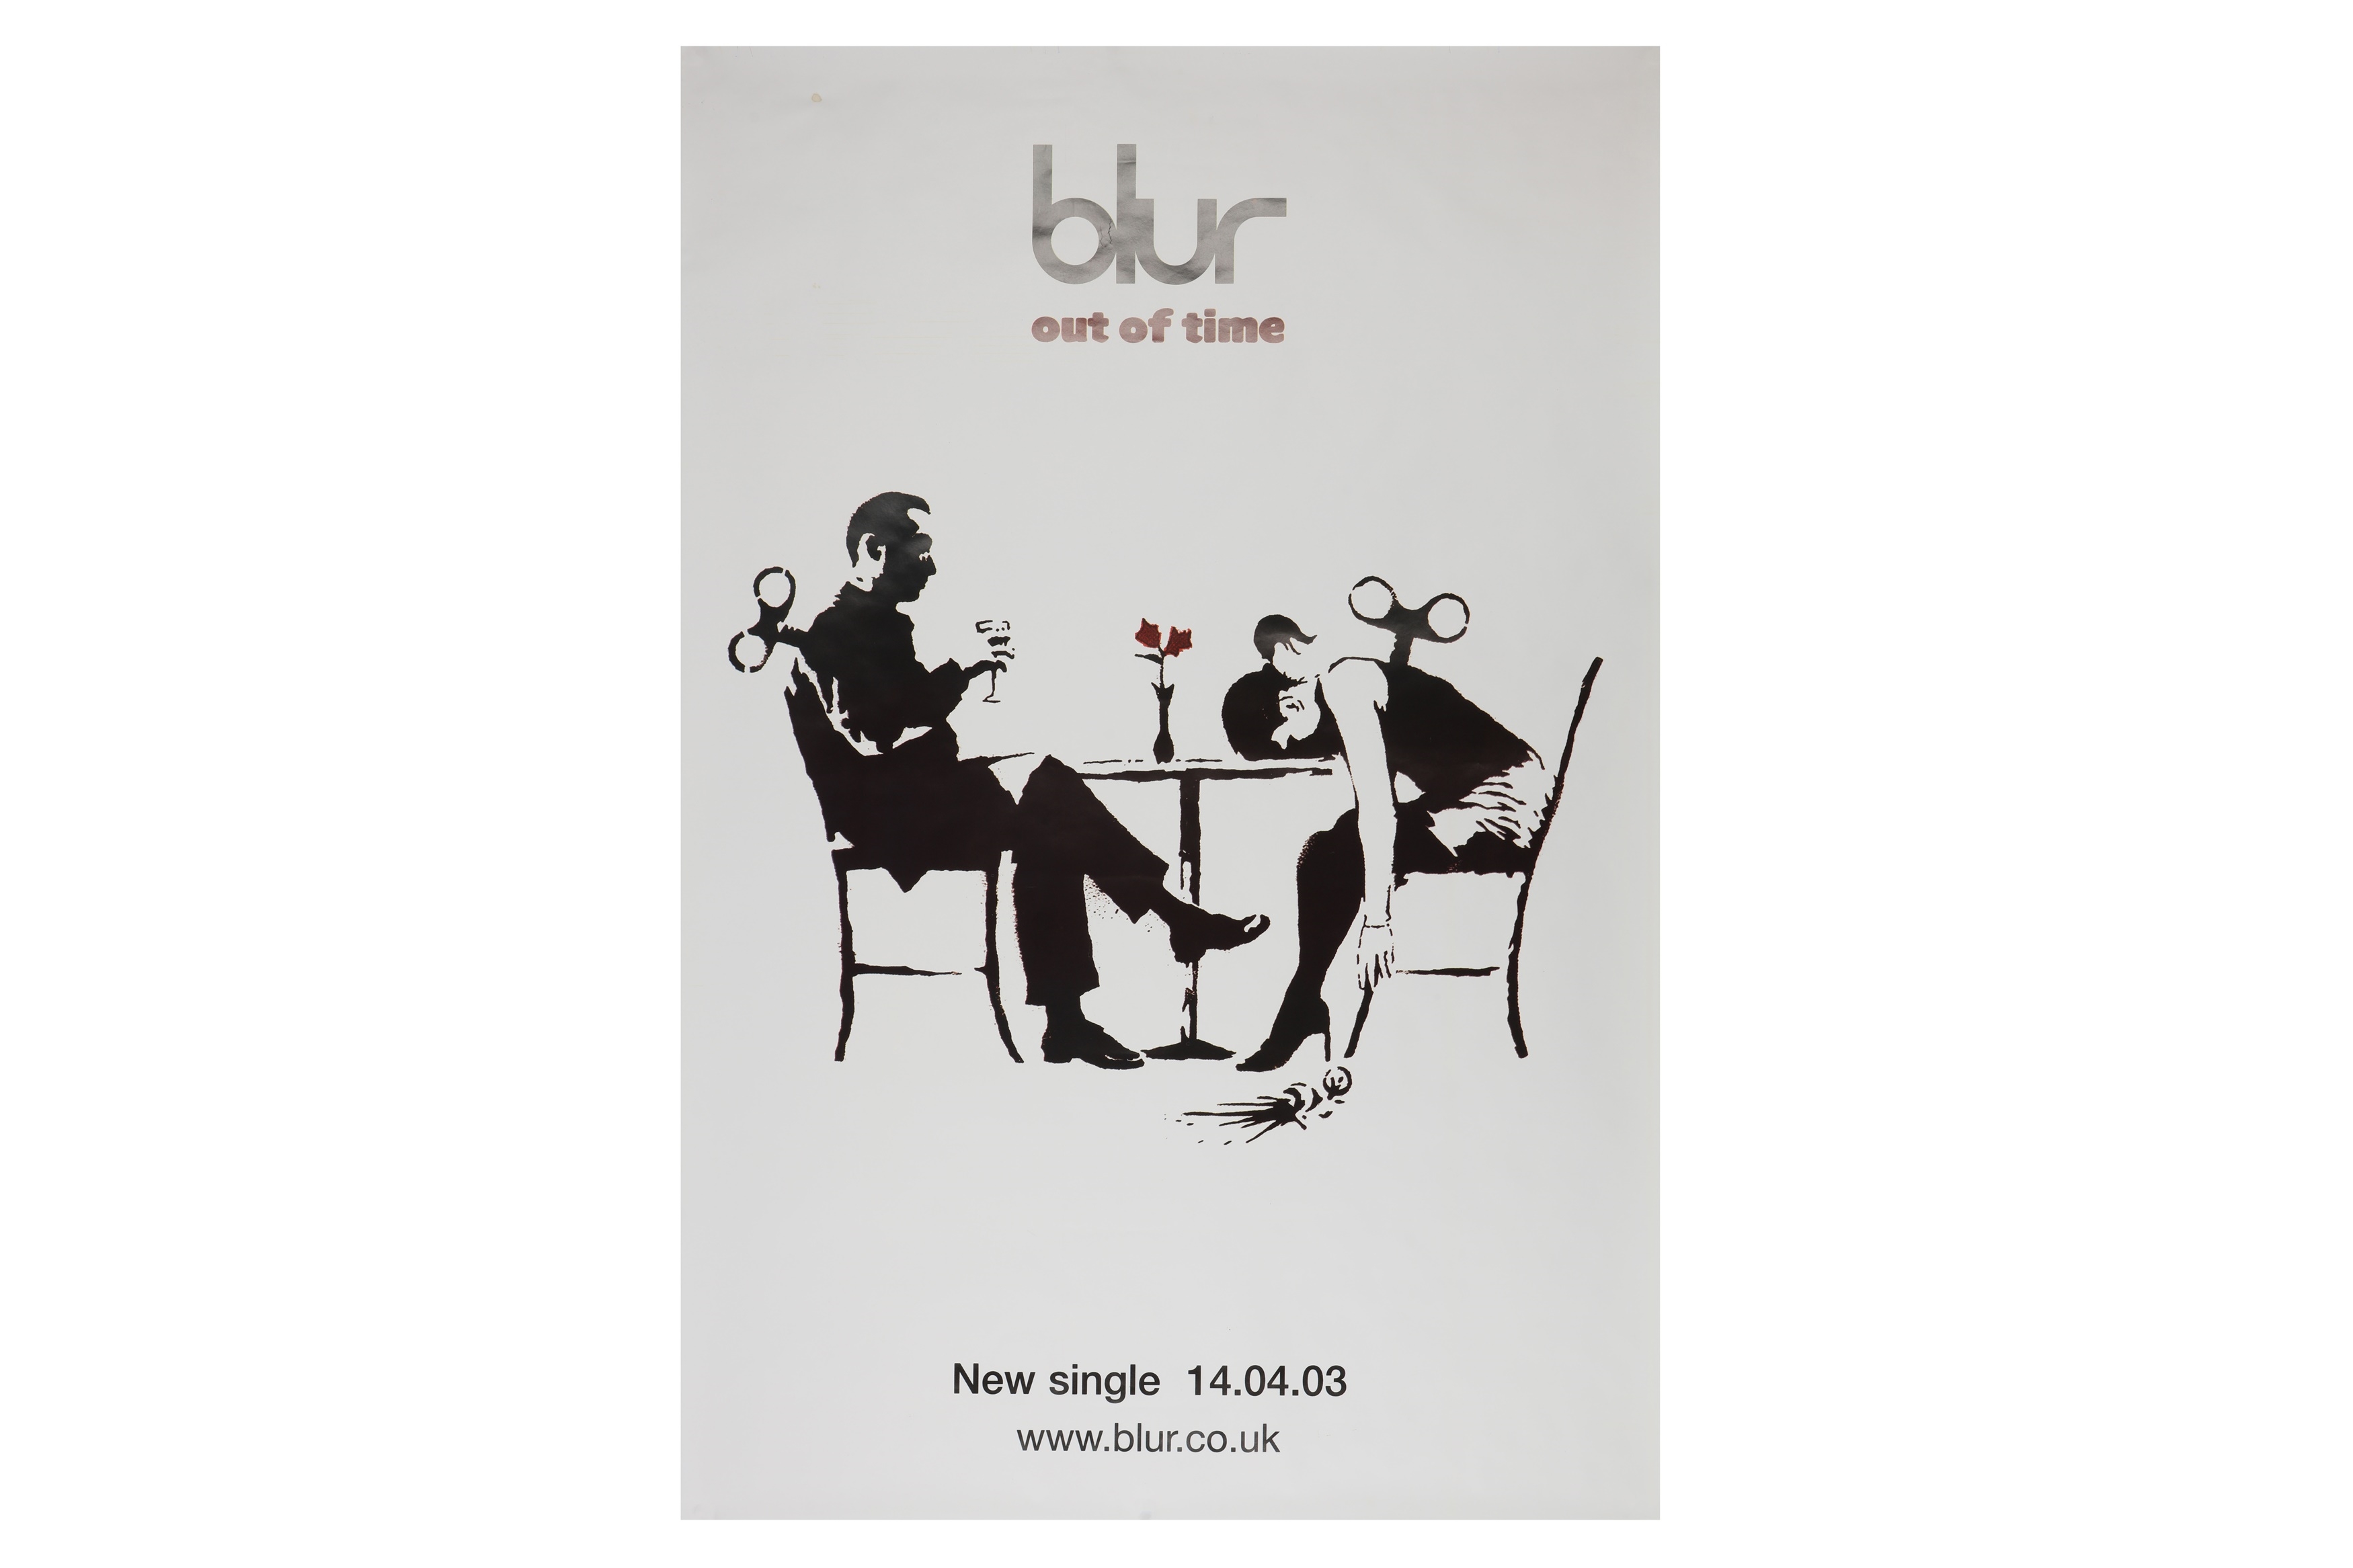 Blur "Out of time" Promo Poster by Banksy, 2003